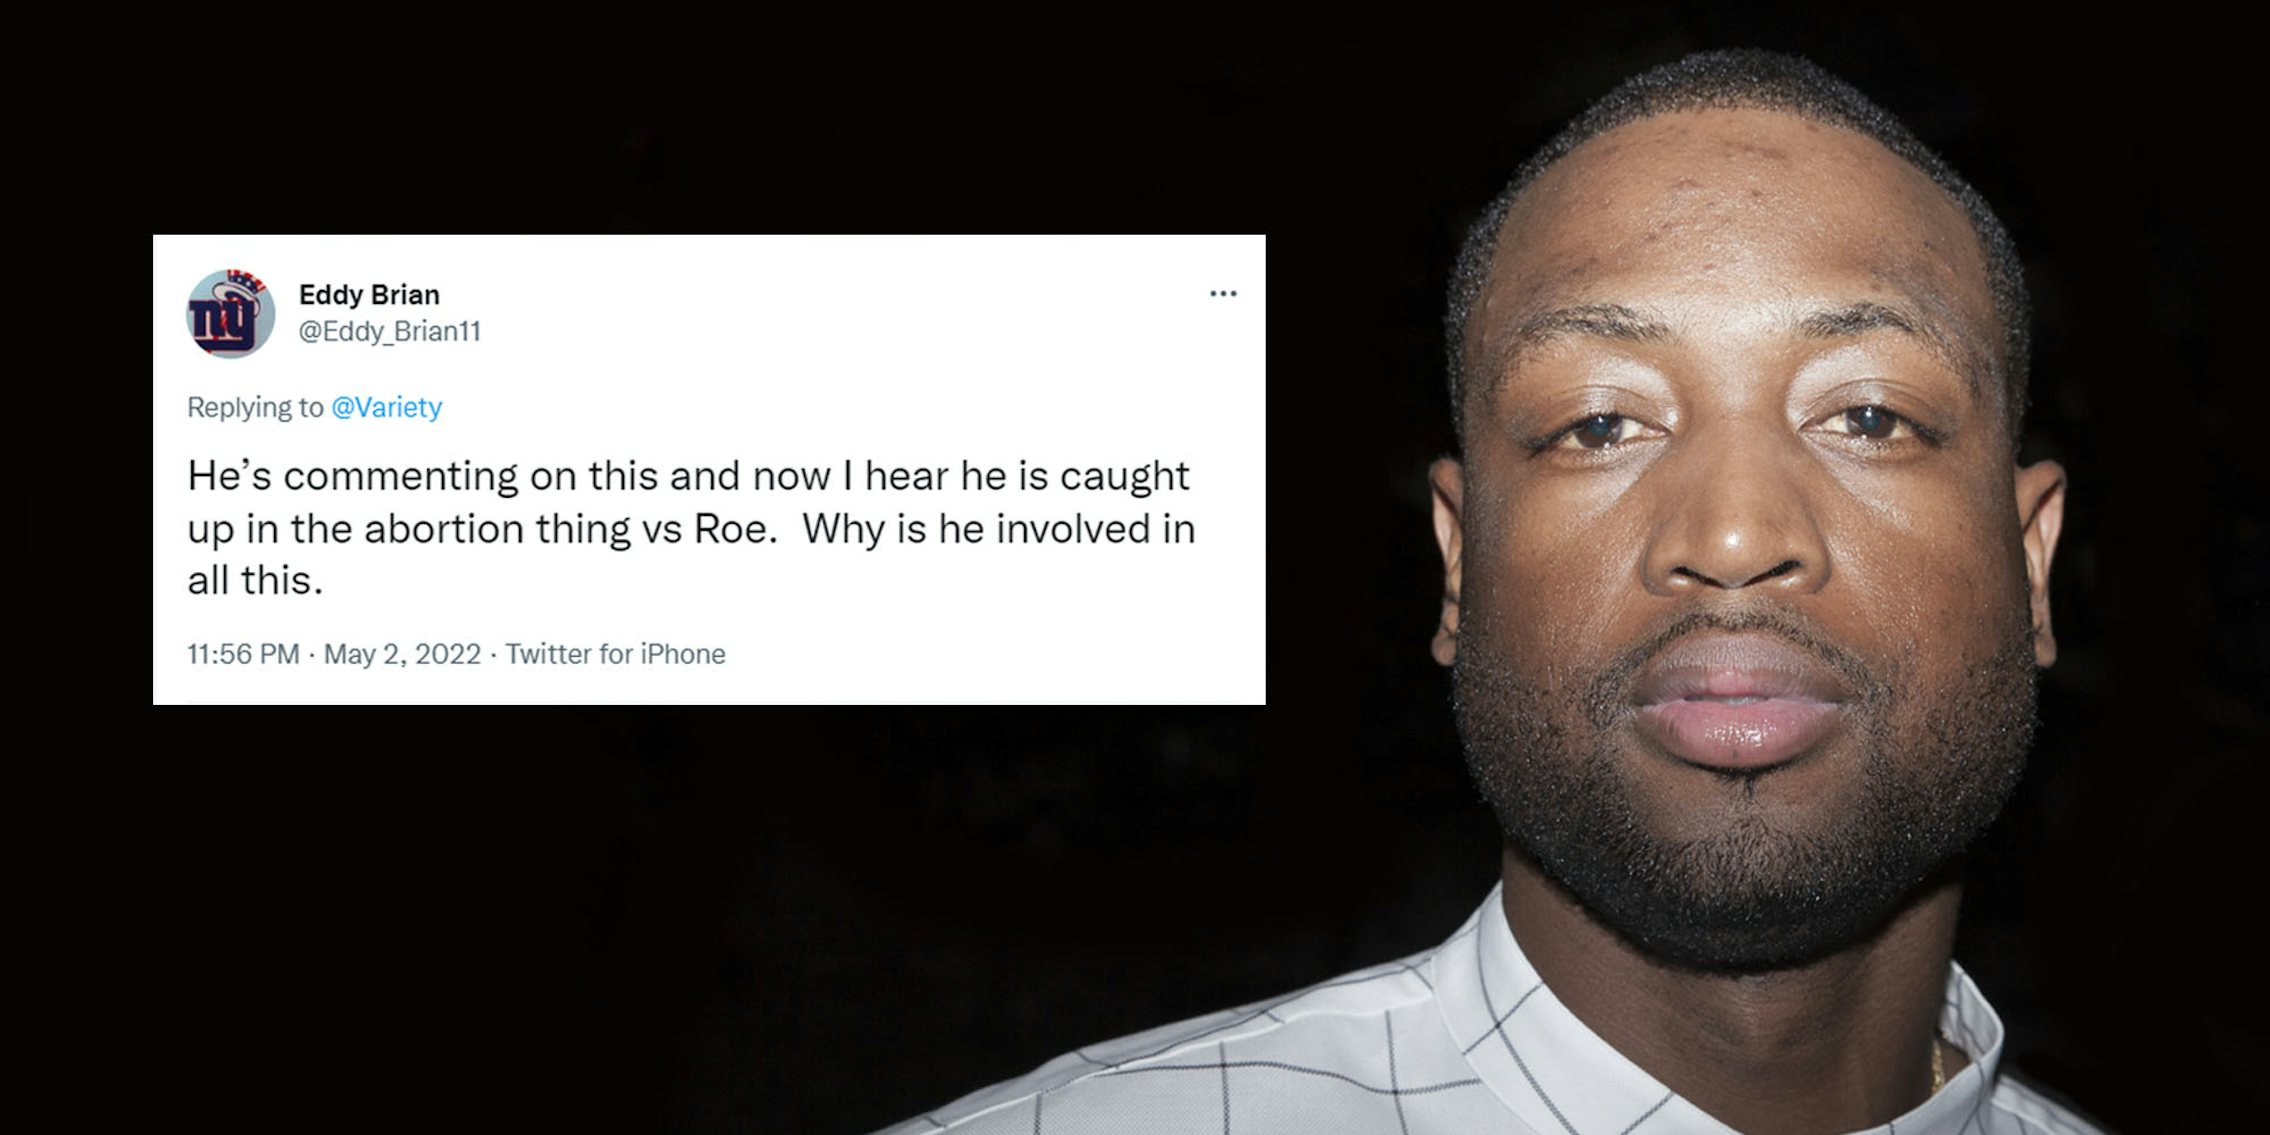 I hated guarding those dudes, especially Rip”- Dwyane Wade reveals